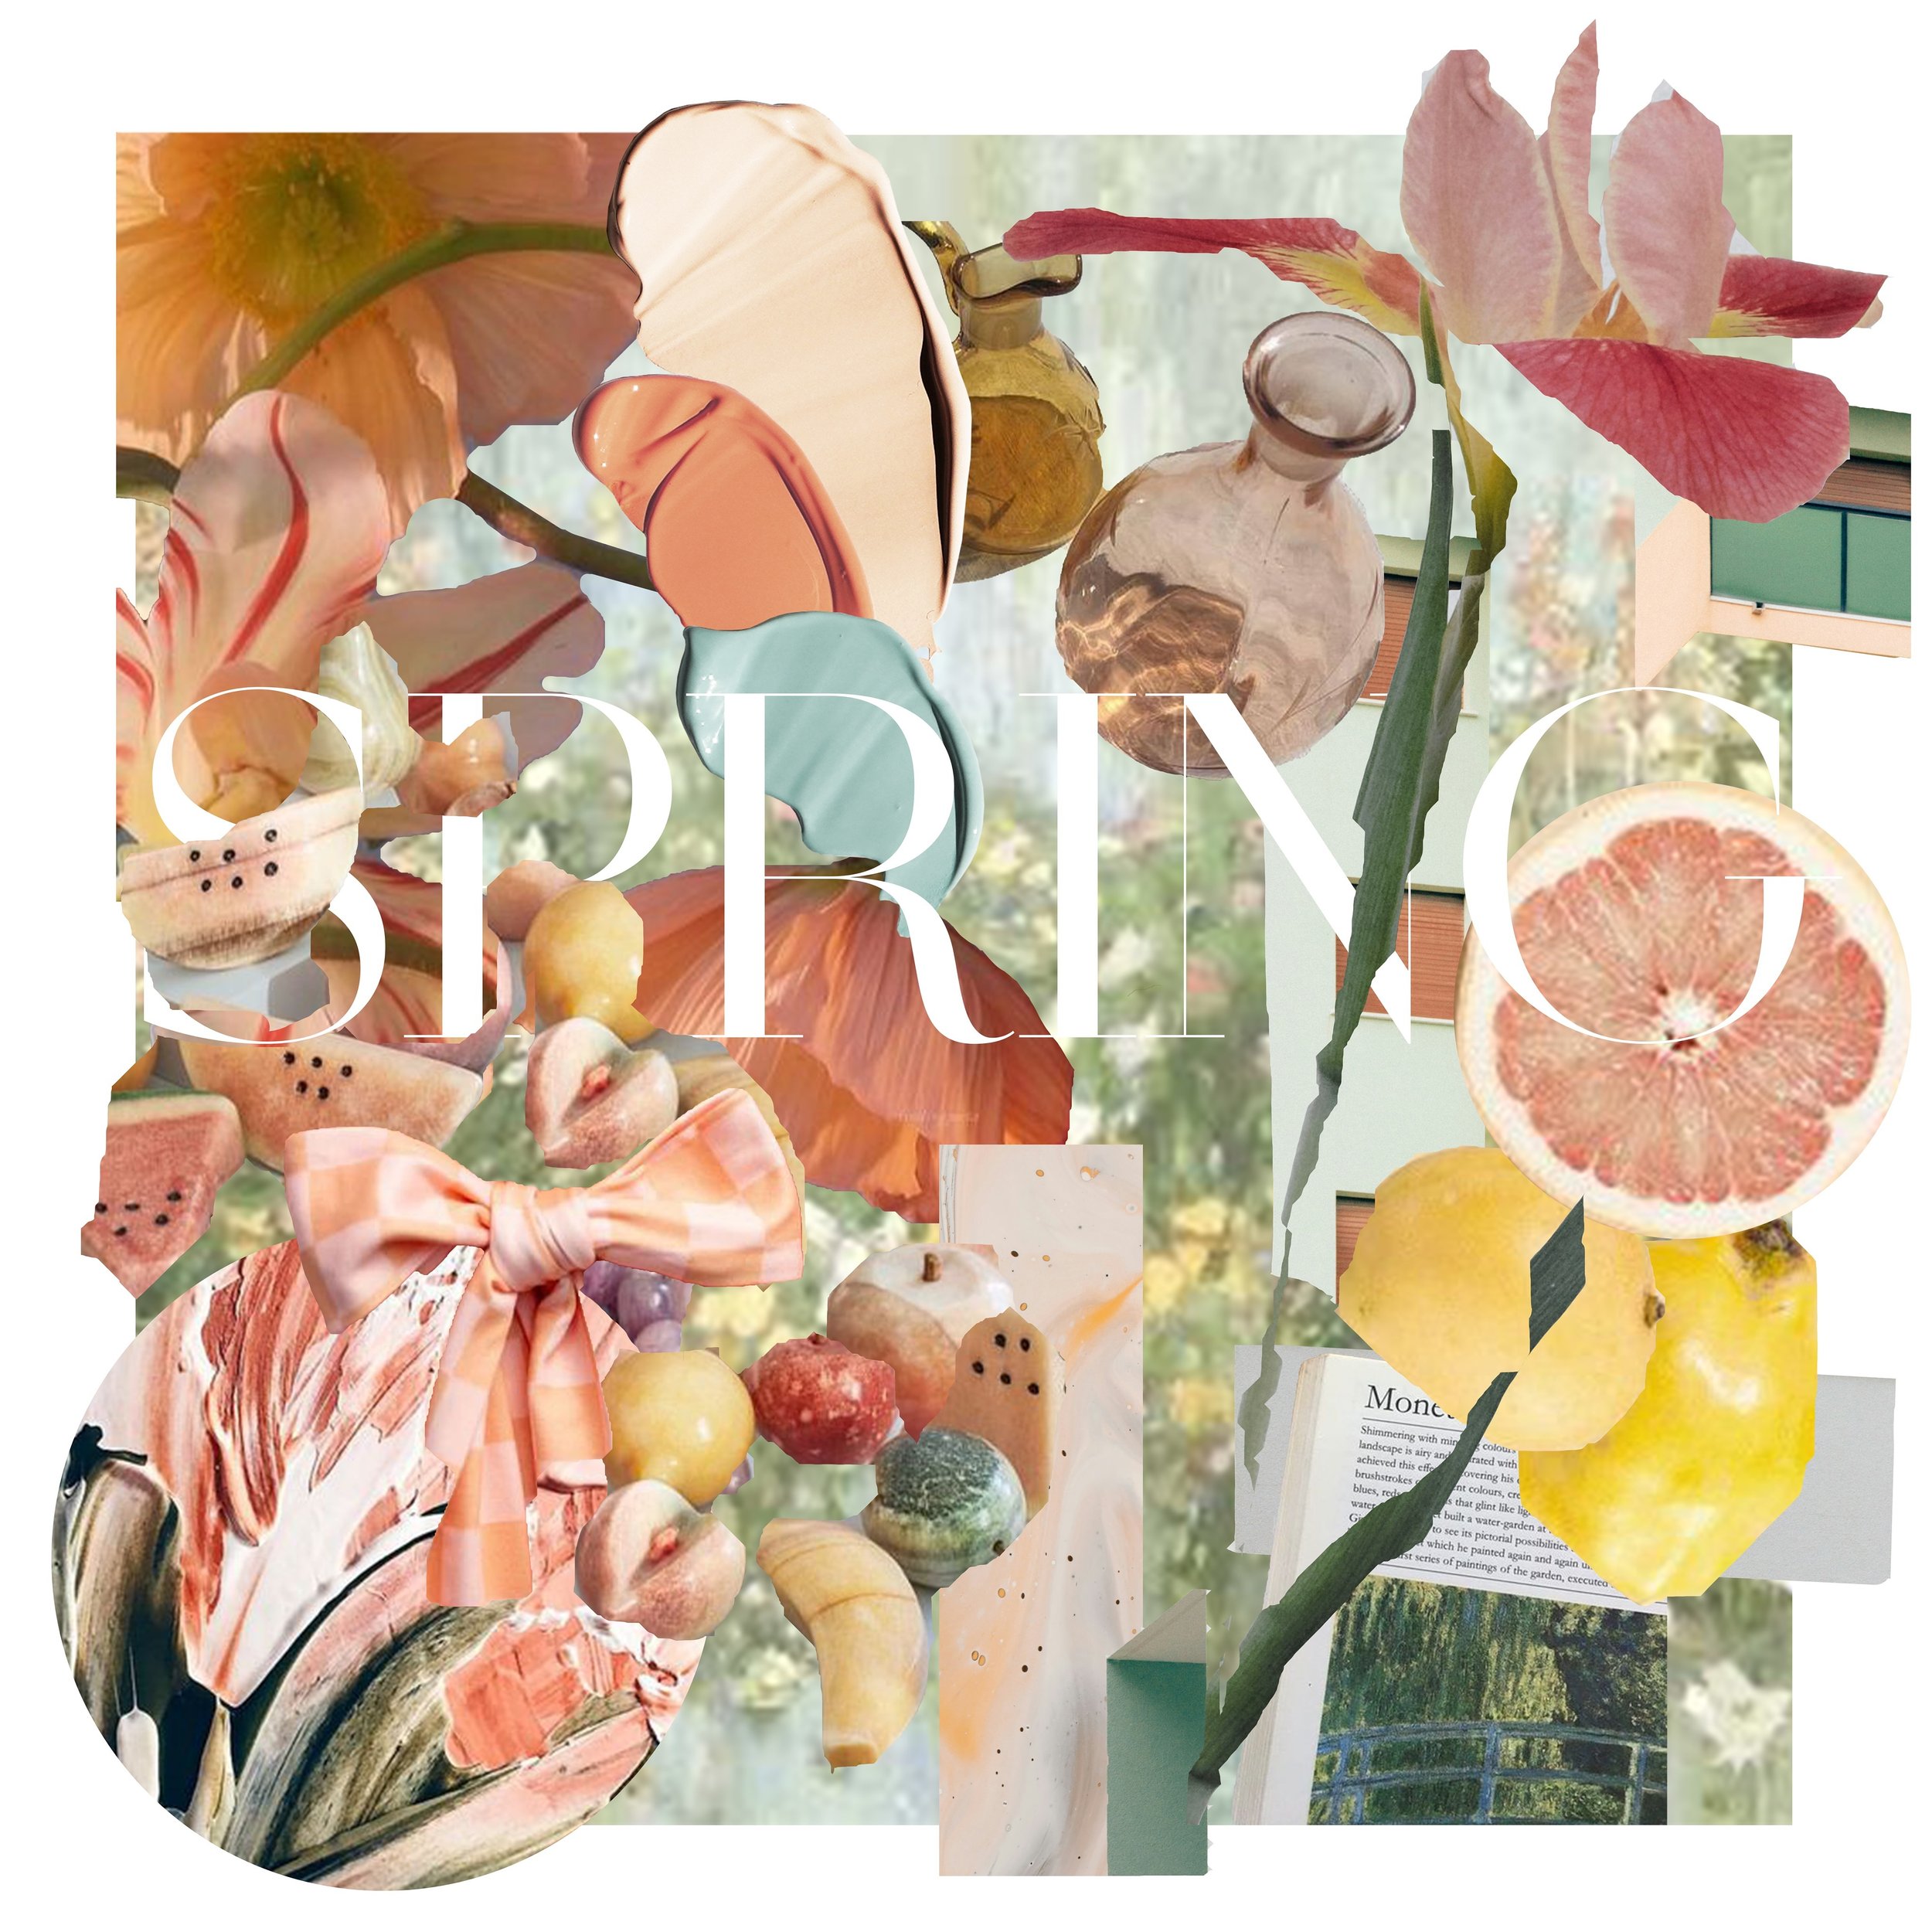 🌷Spring is here! 🌷

Ah, spring! A season of renewal, awakening, and endless possibilities. As the world around us bursts into life, I find myself wondering: What does spring mean to you?

Does spring inspire you to tidy up and declutter, like a fre